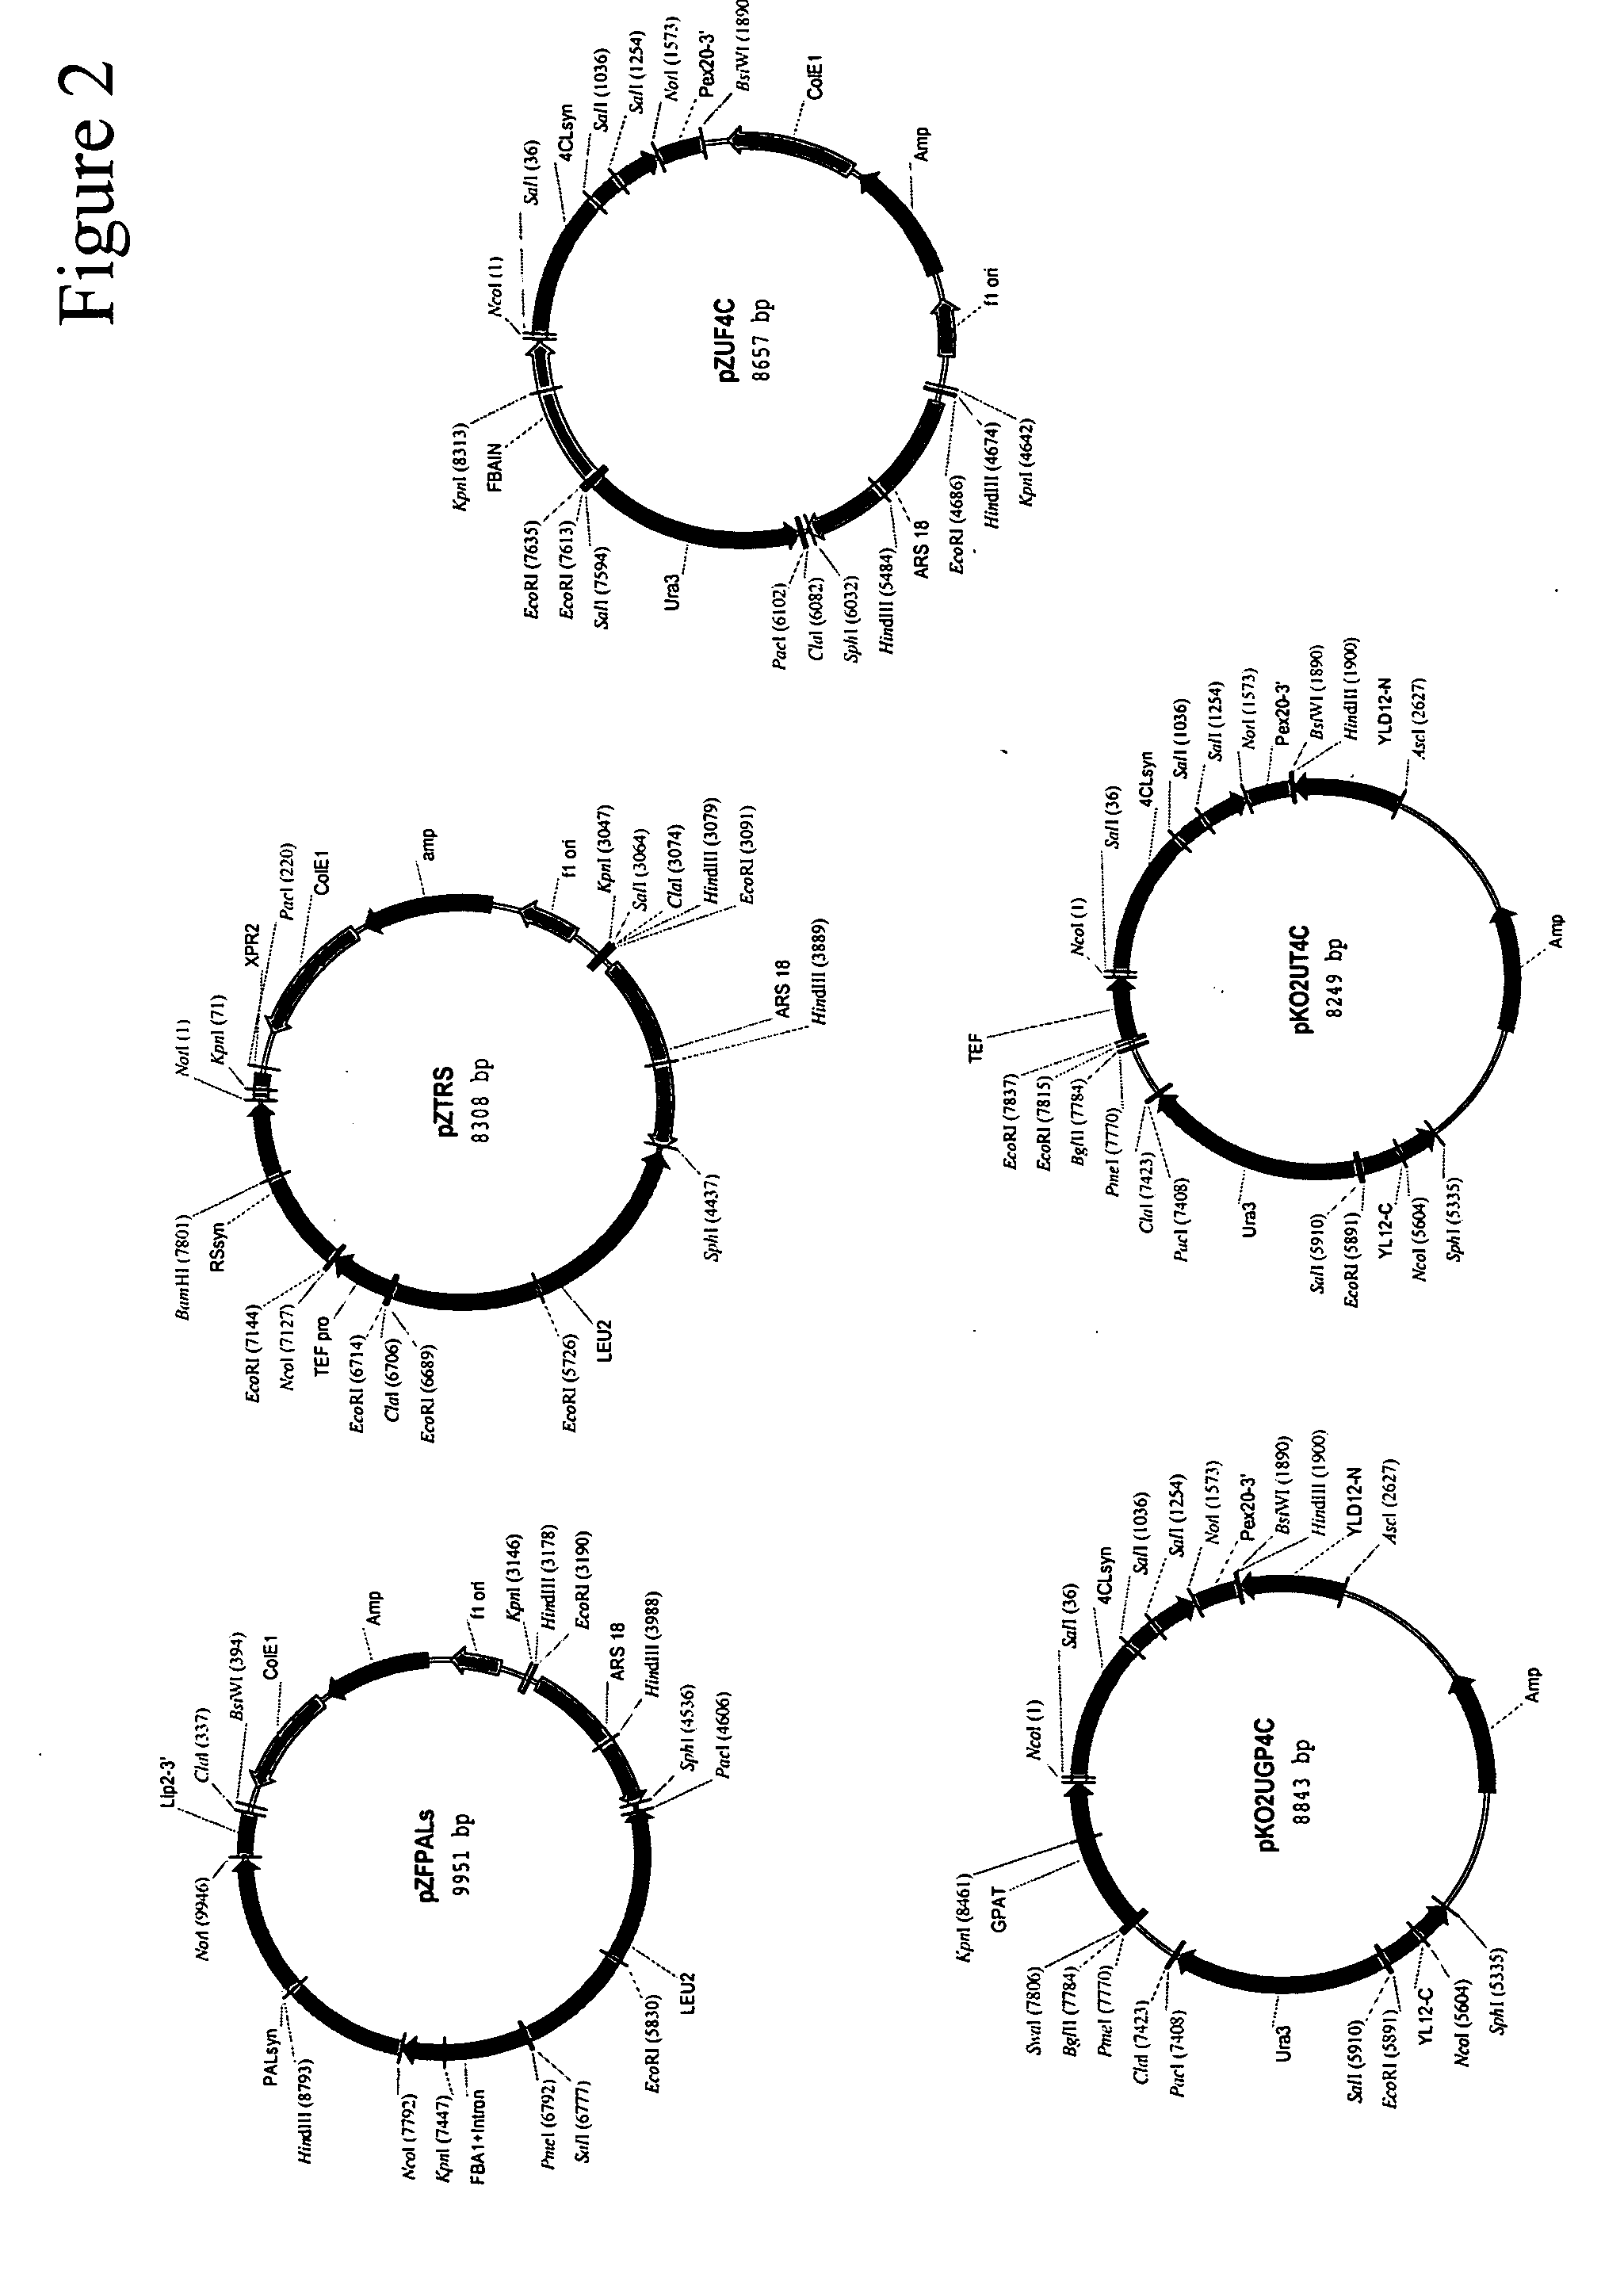 Method for the production of resveratrol in a recombinant oleaginous microorganism